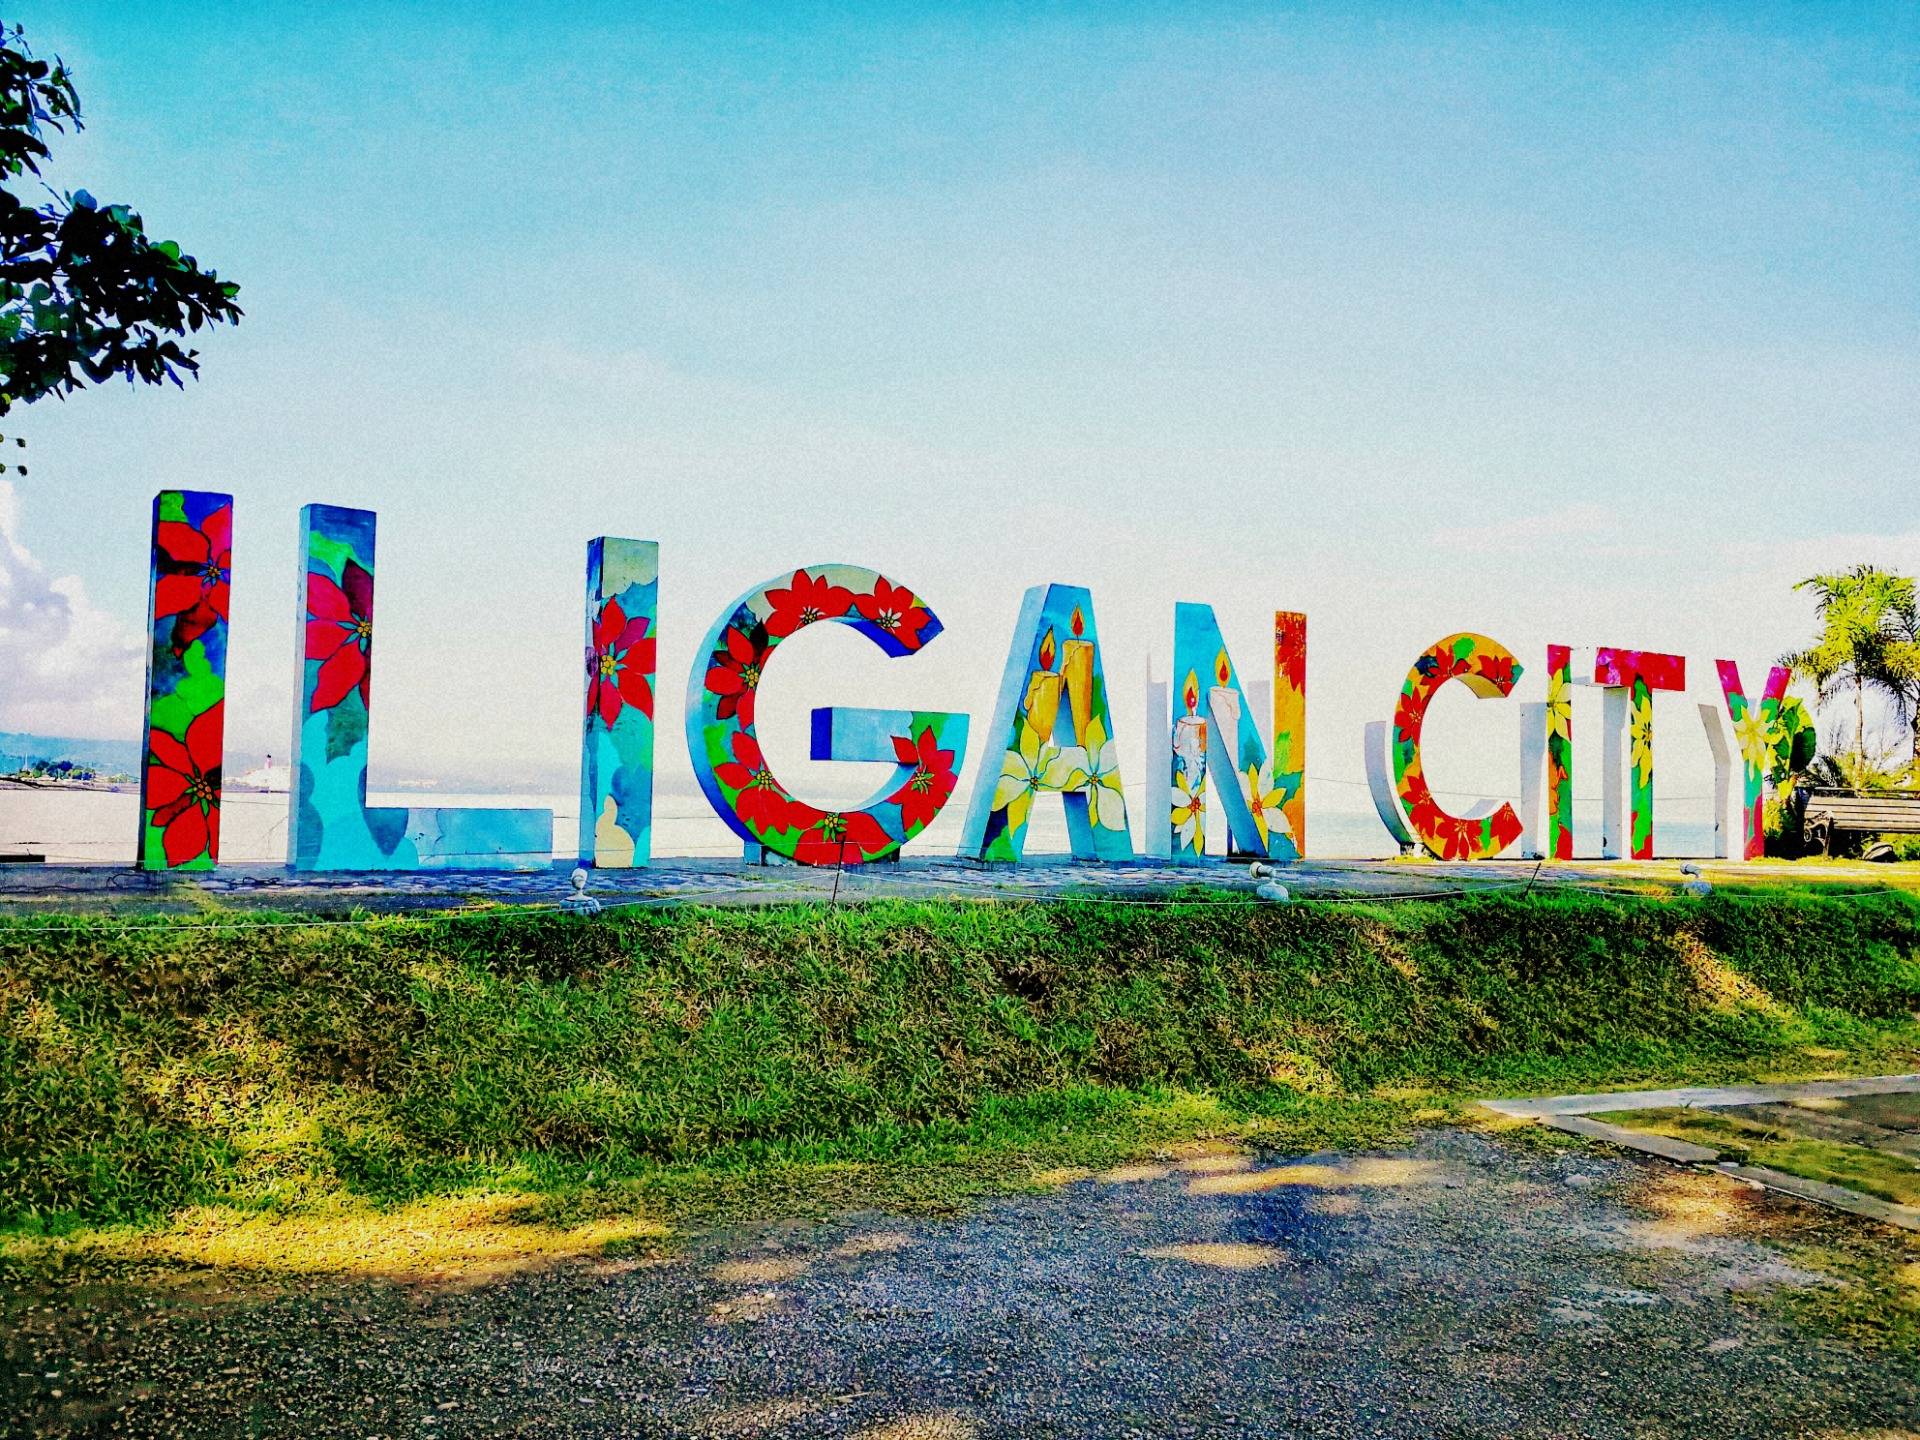 3 Places in Iligan City That I Highly Recommend Visiting